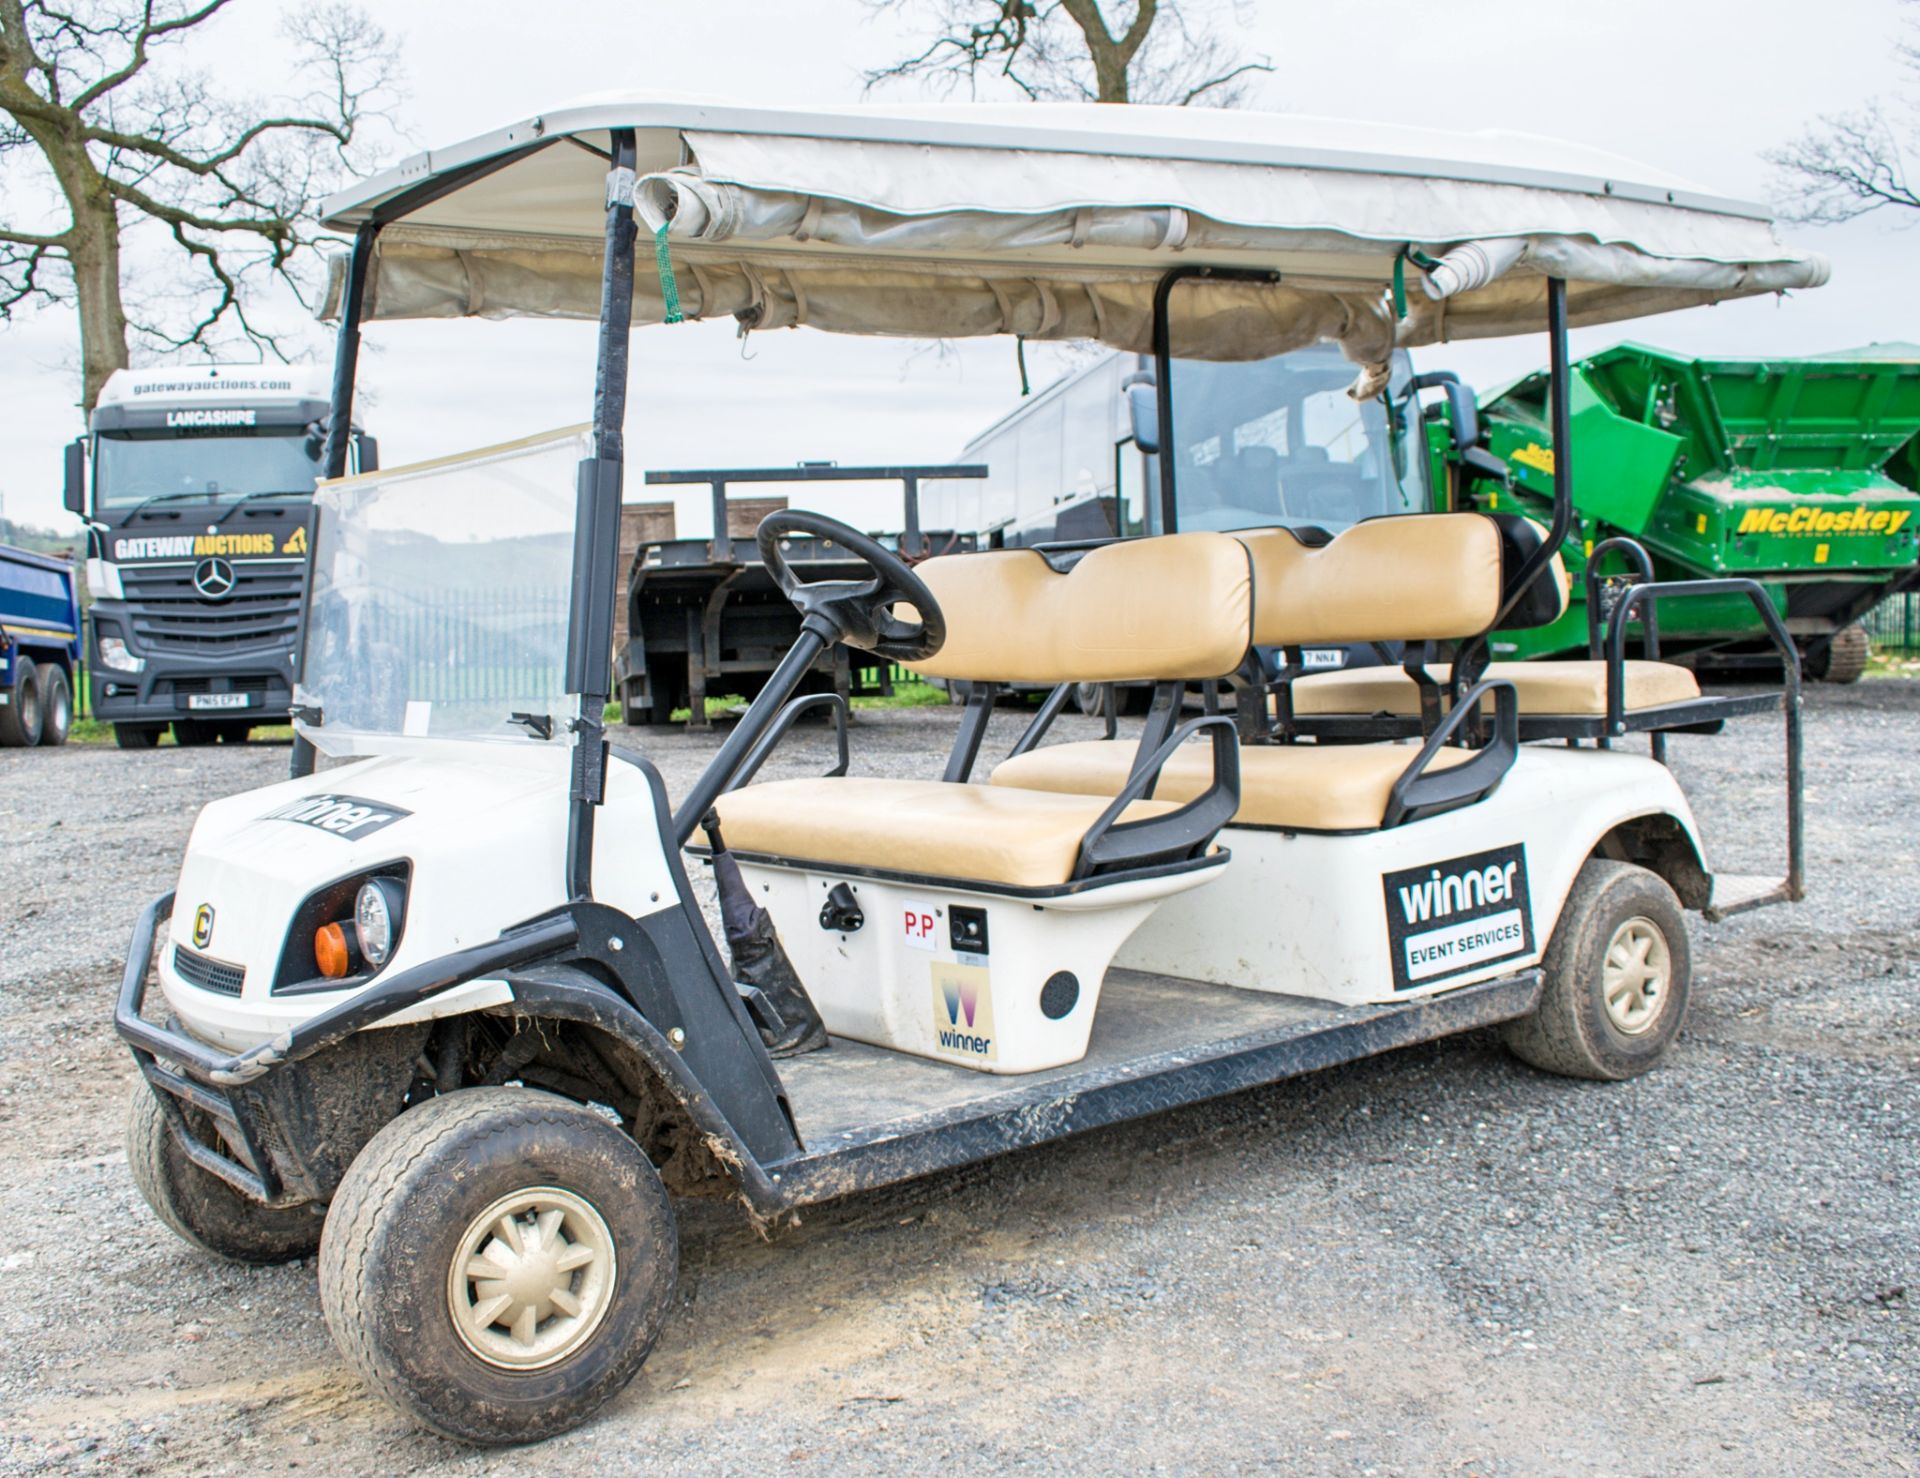 Cushman 6 seat petrol driven golf buggy Year: 2012 S/N: 281245 Recorded Hours: 0184